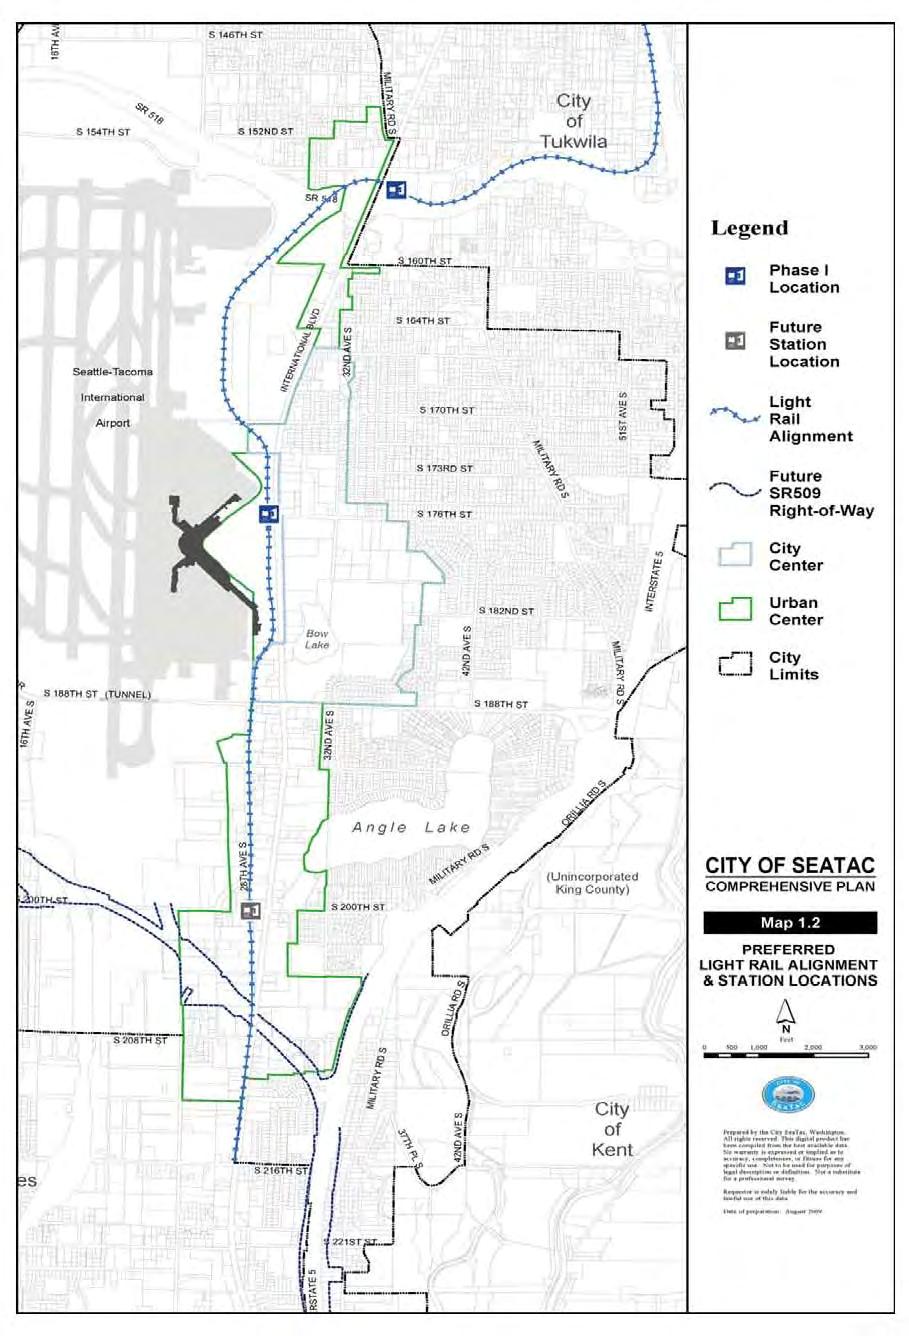 Review of Plans Pertinent to the Federal Way Transit Extension Source: City of SeaTac, 2011.